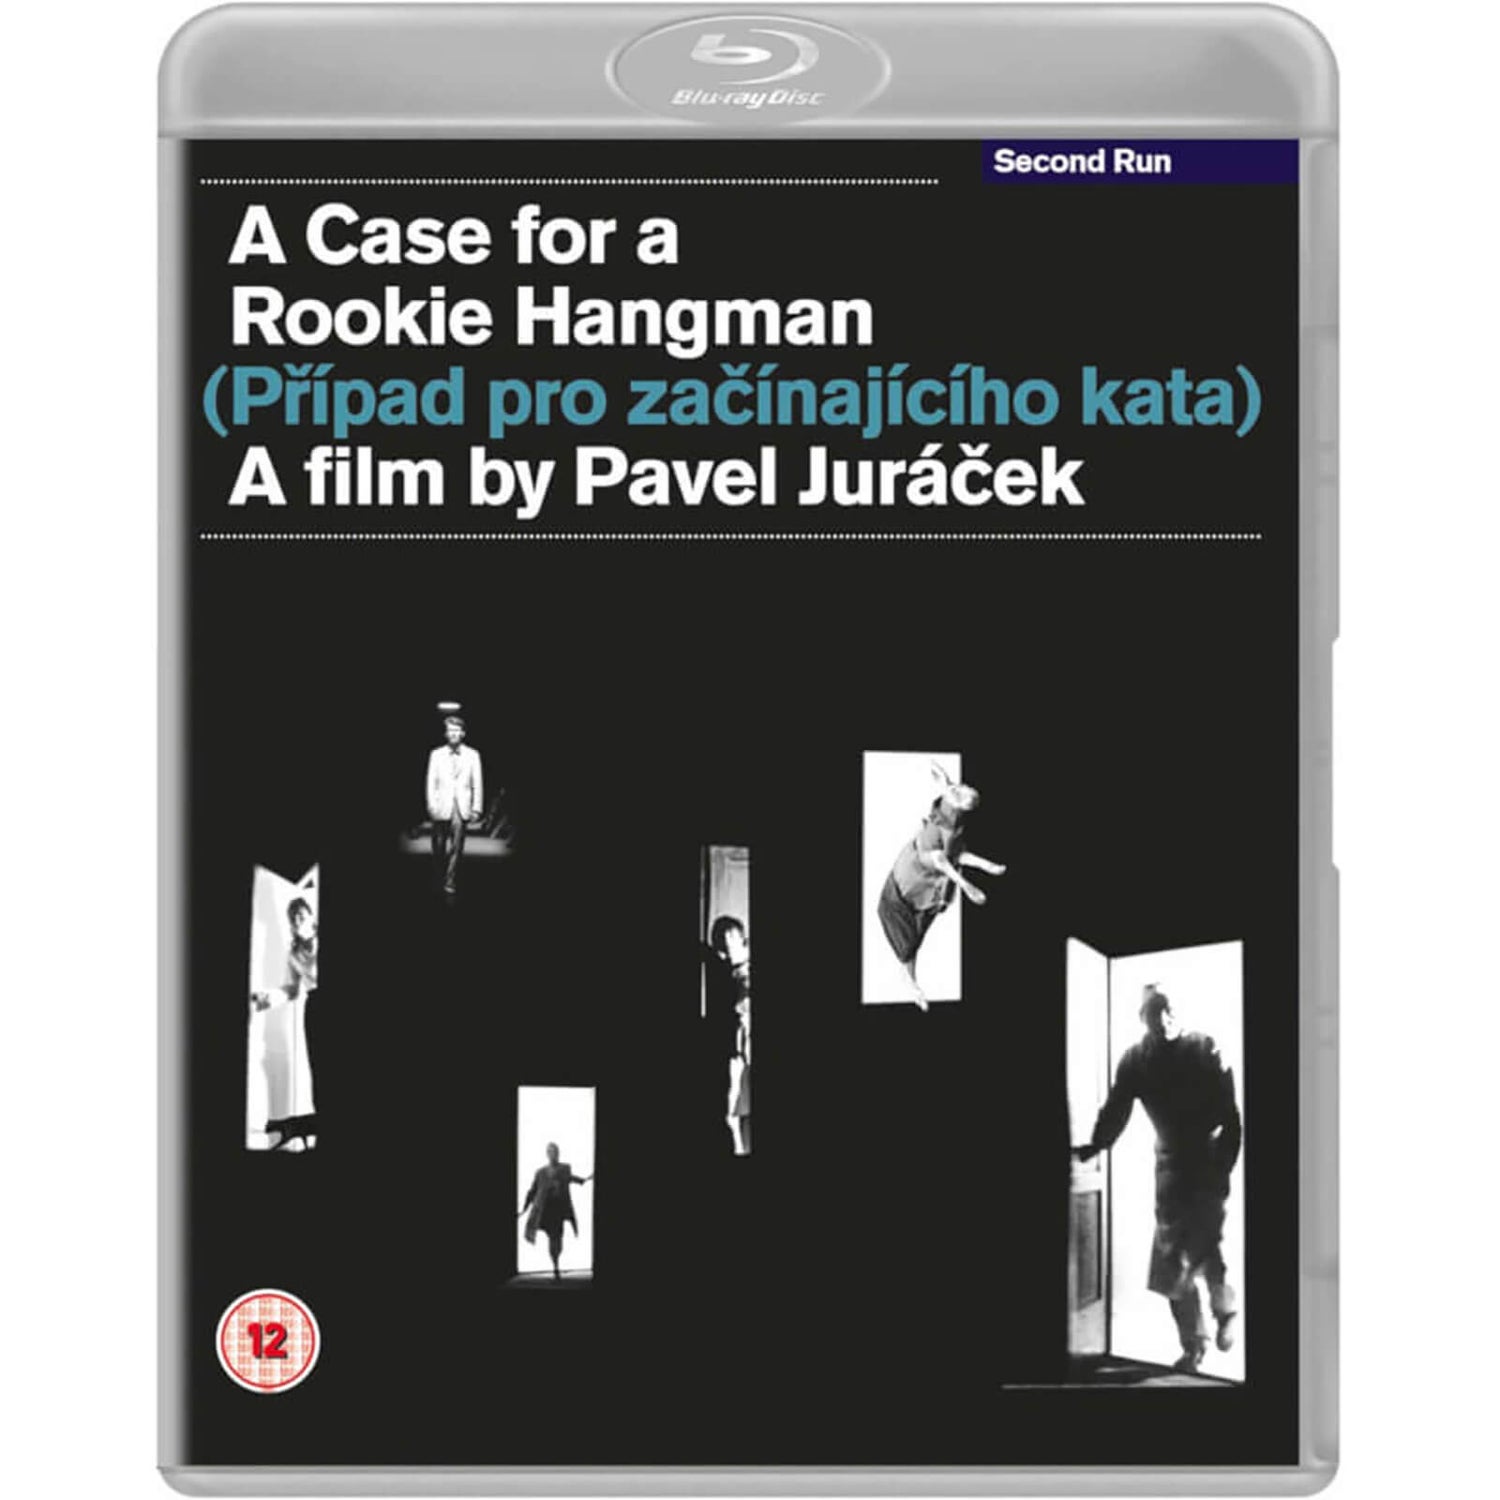 A Case For A Rookie Hangman Blu-ray